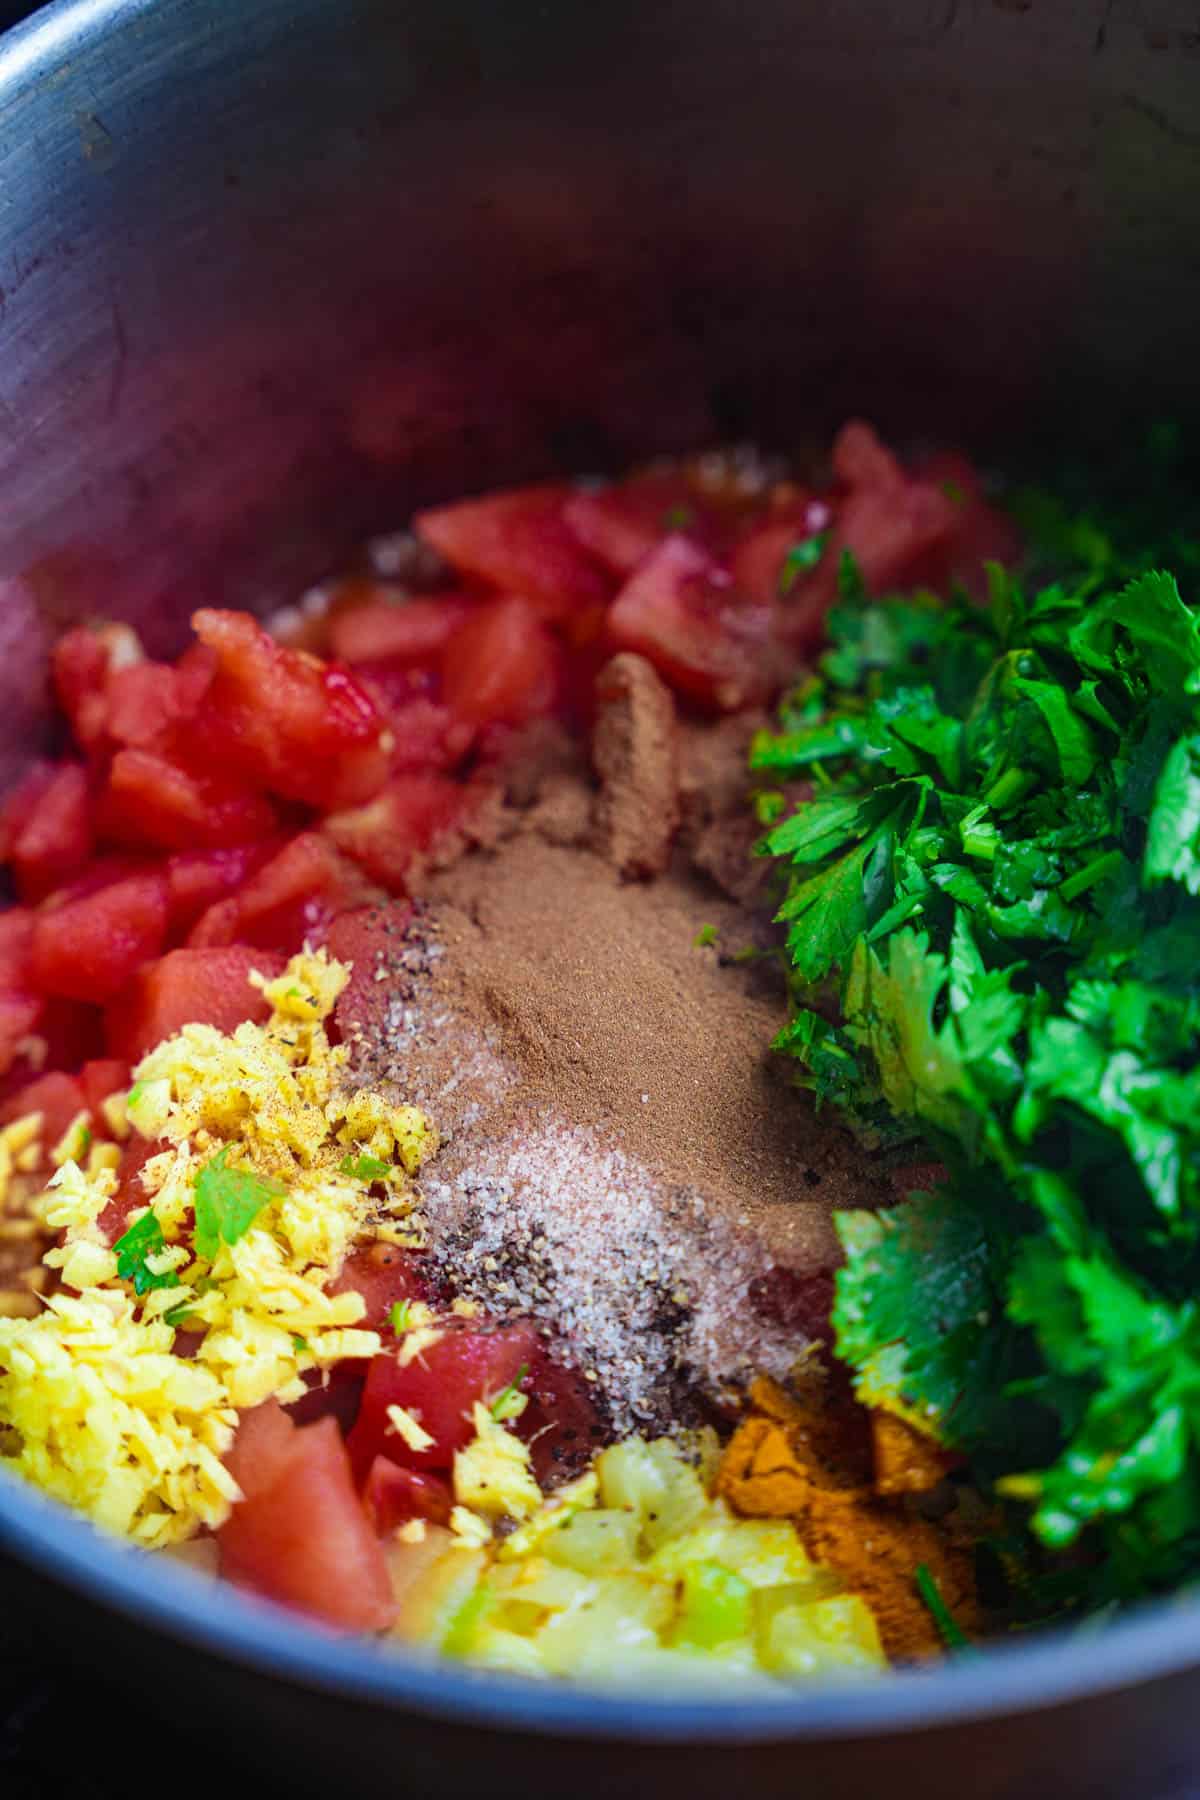 Diced tomatoes, parsley, cilantro, ginger, pepper, cinnamon, turmeric, and salt are added to the pot.